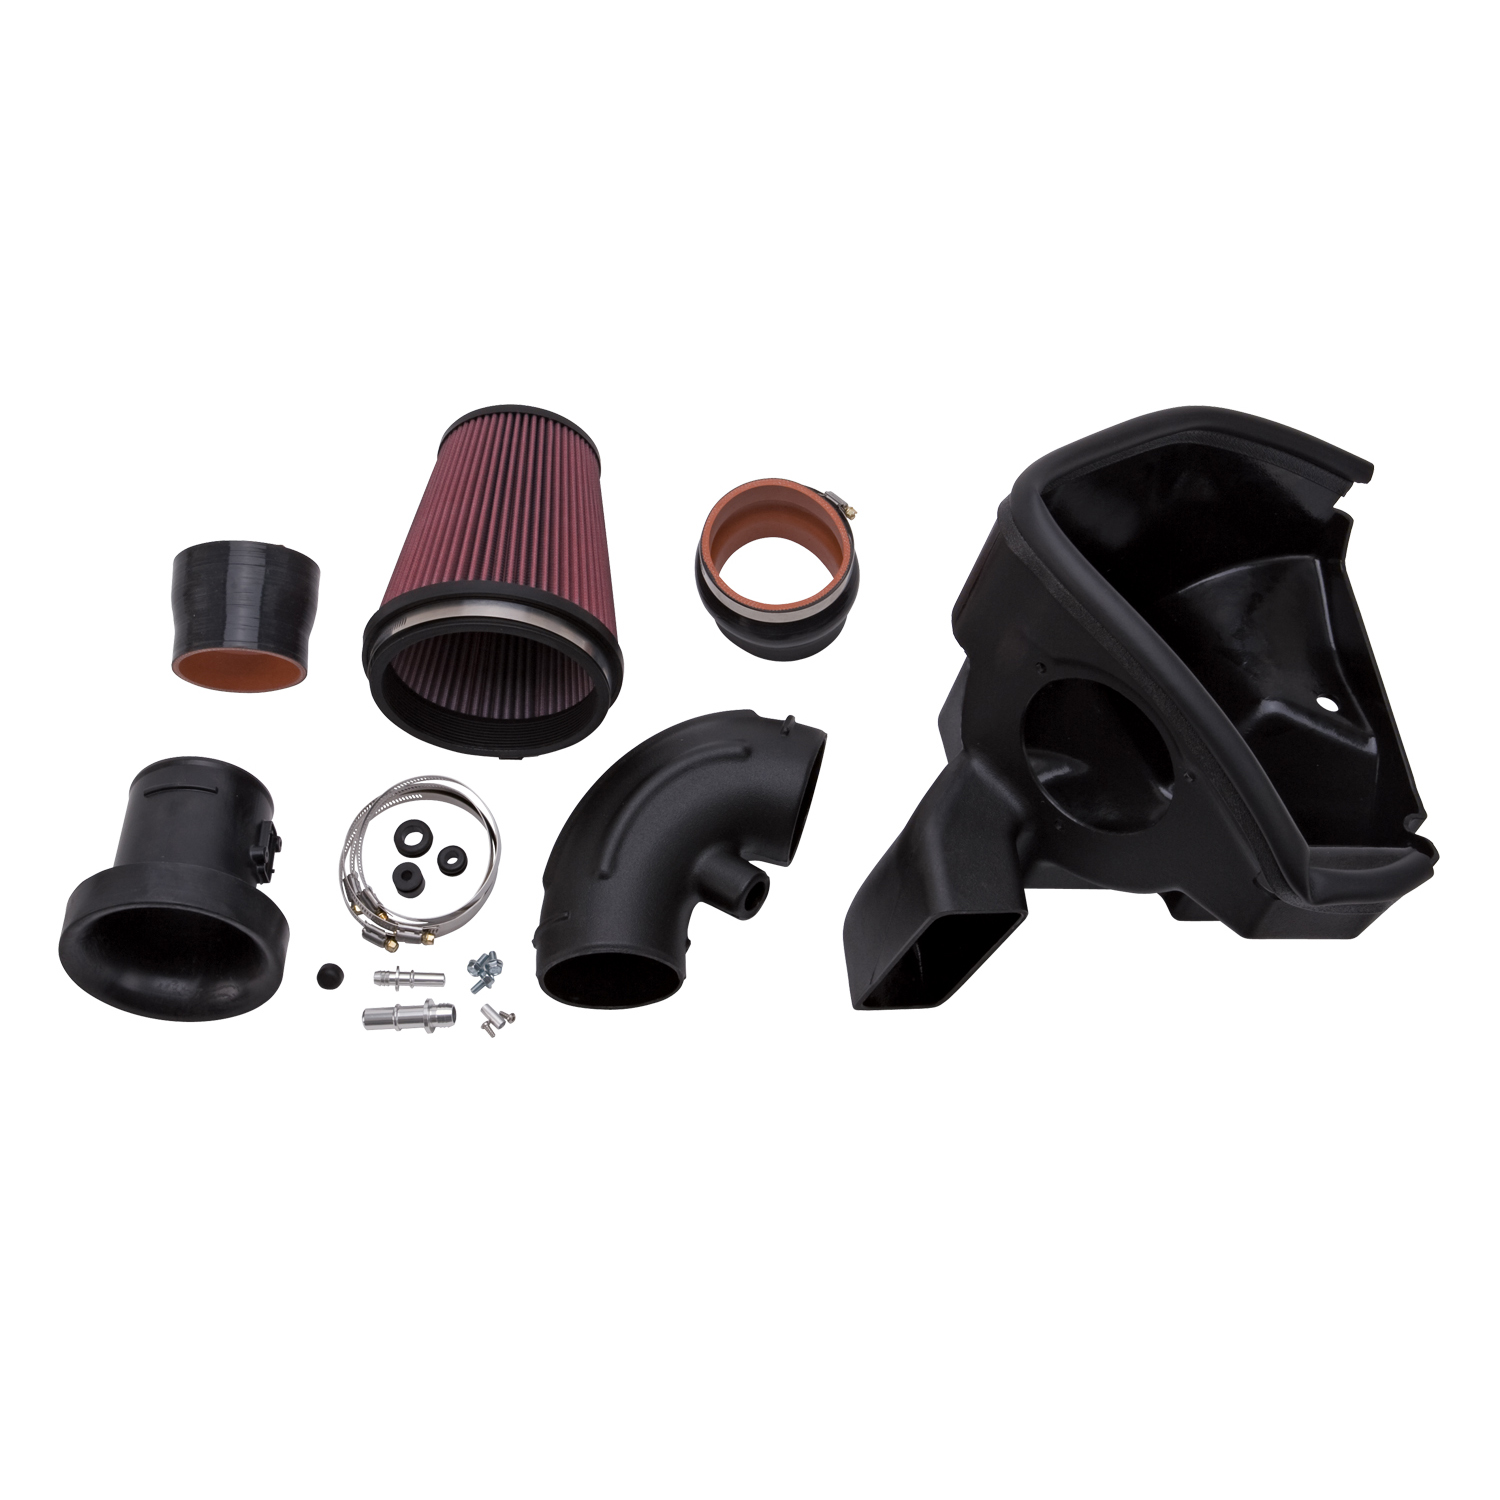 Edelbrock Competition Air Intake Kit #15898 For 11-14 Mustang GT